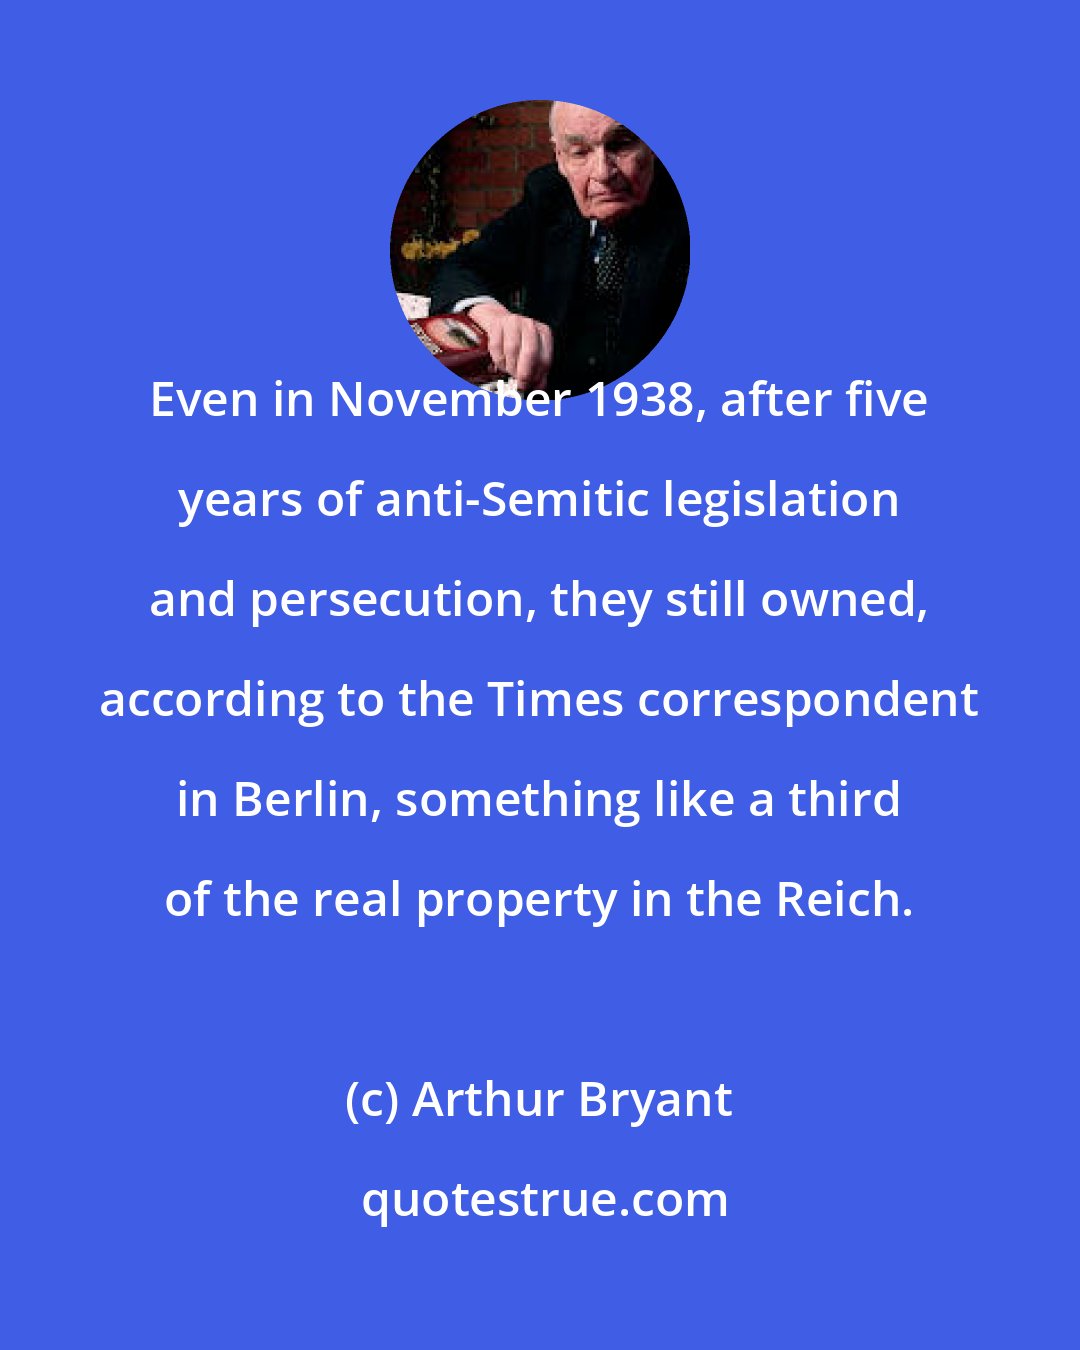 Arthur Bryant: Even in November 1938, after five years of anti-Semitic legislation and persecution, they still owned, according to the Times correspondent in Berlin, something like a third of the real property in the Reich.